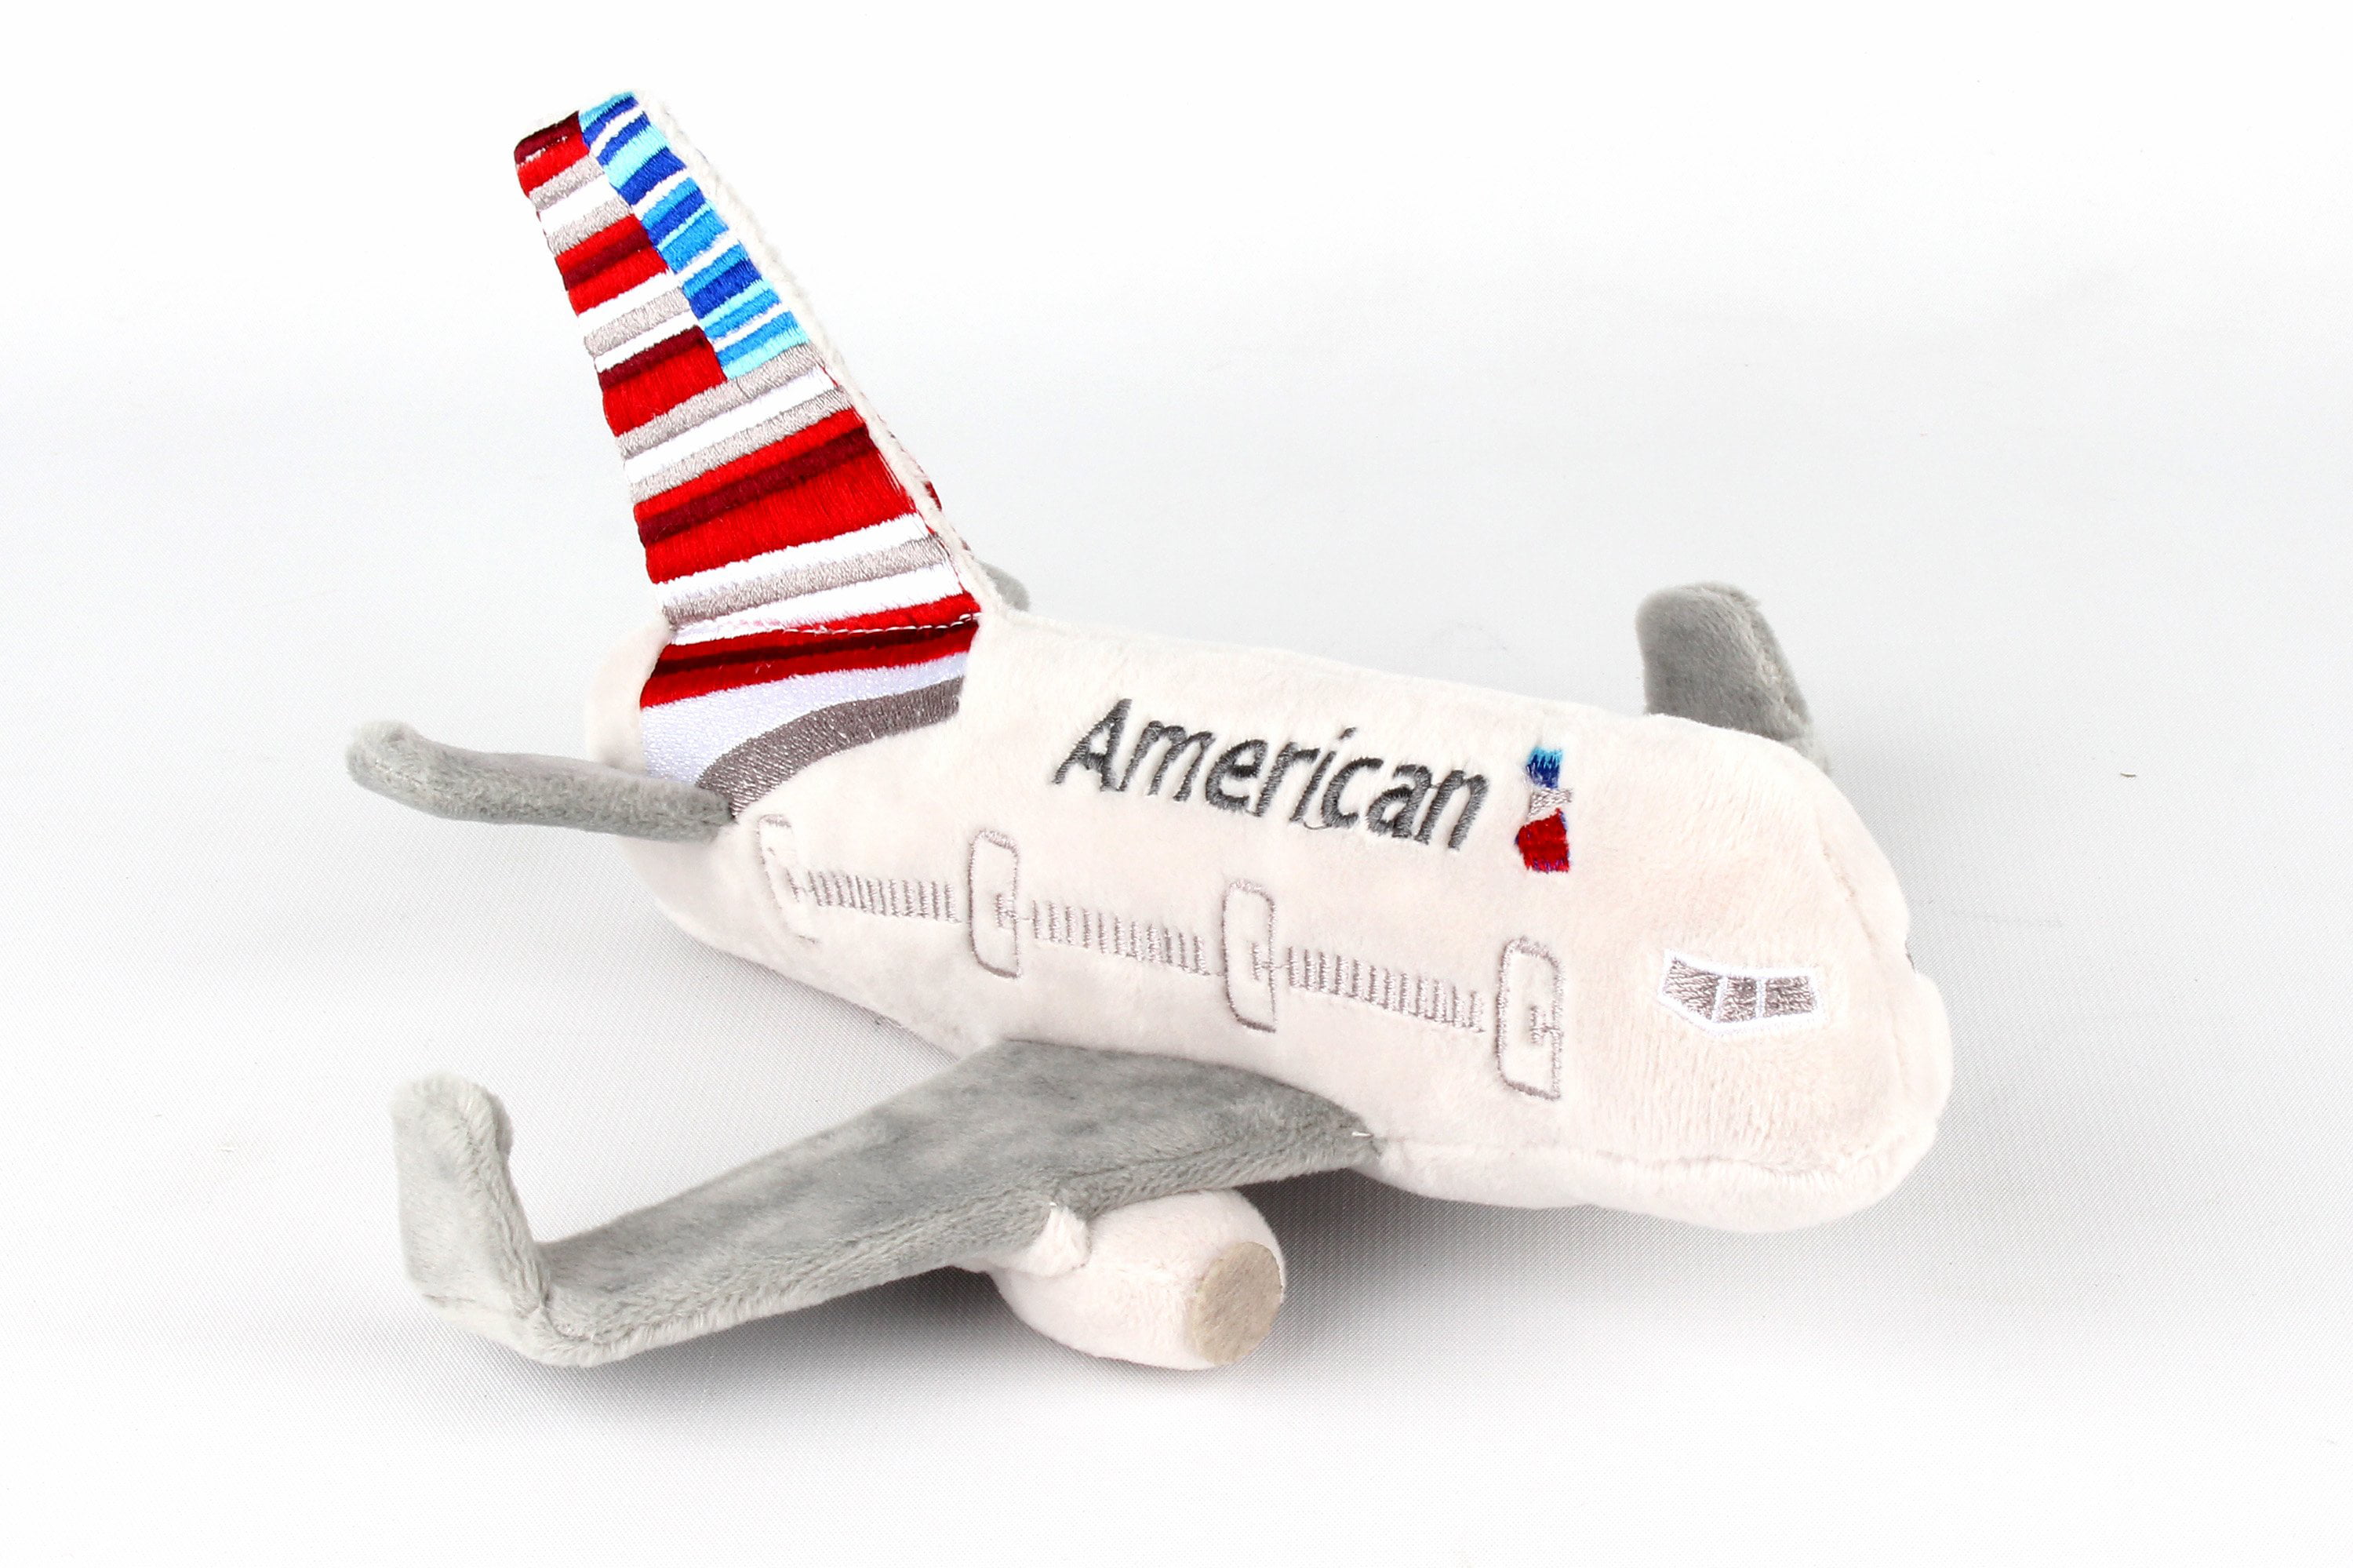 MT0041 AMERICAN AIRLINES PLUSH AIRPLANE W/SOUND